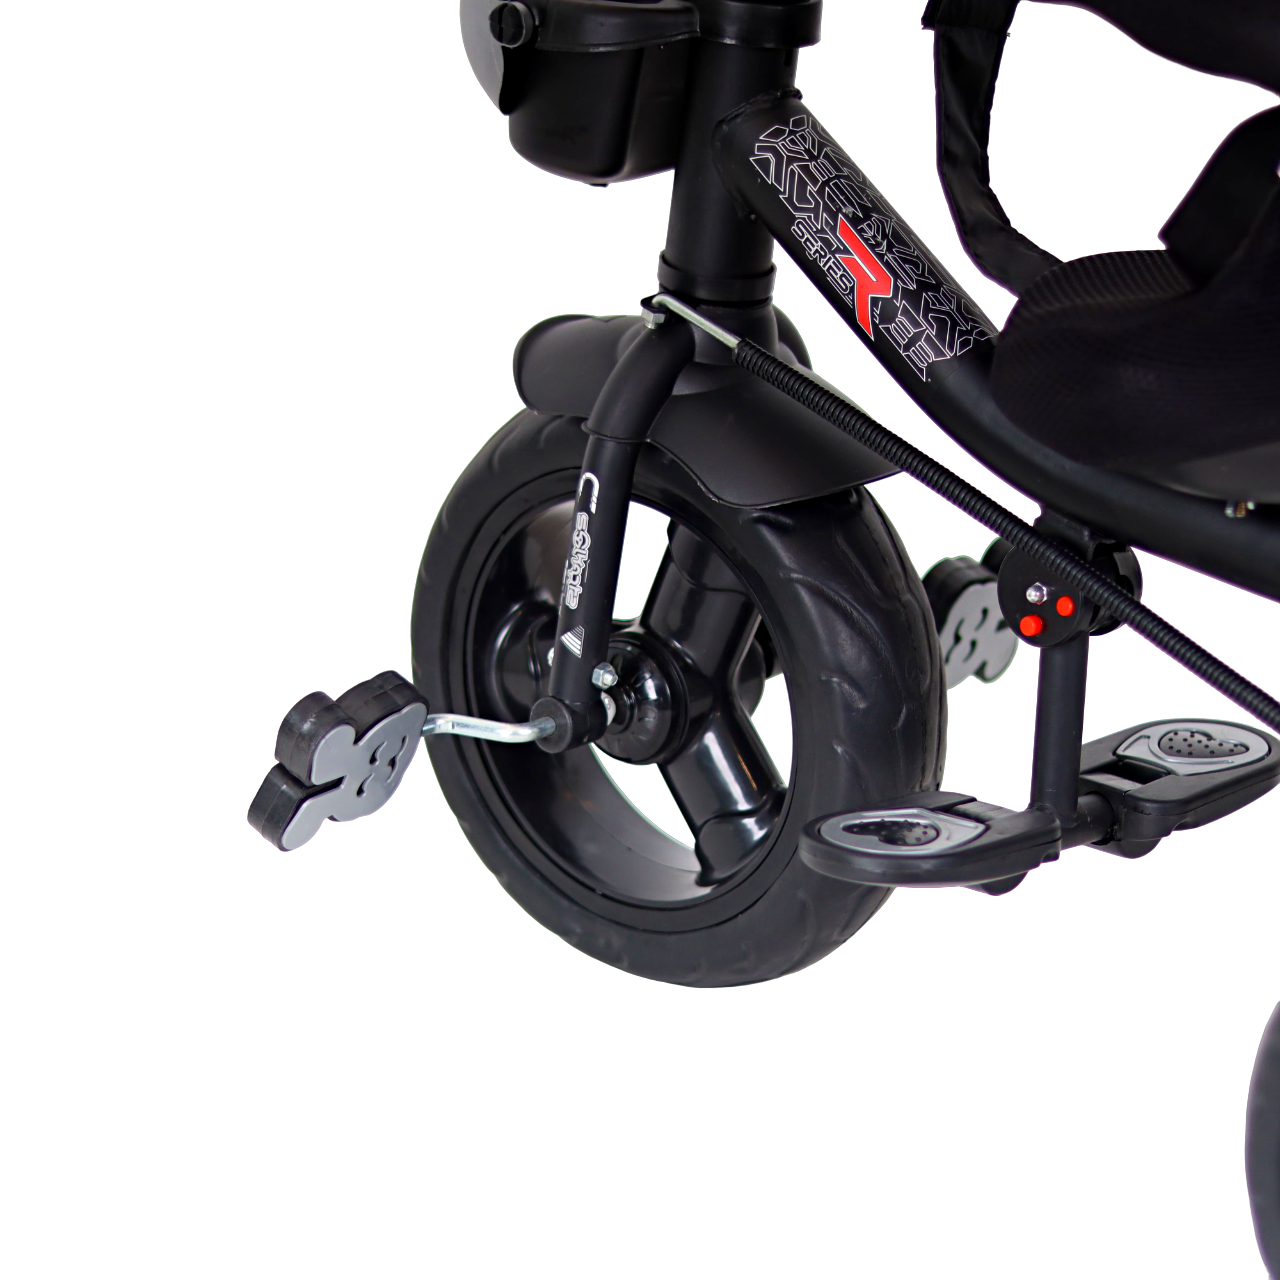 Luusa R9 Power Tricycle for Kids - Hoodless Version